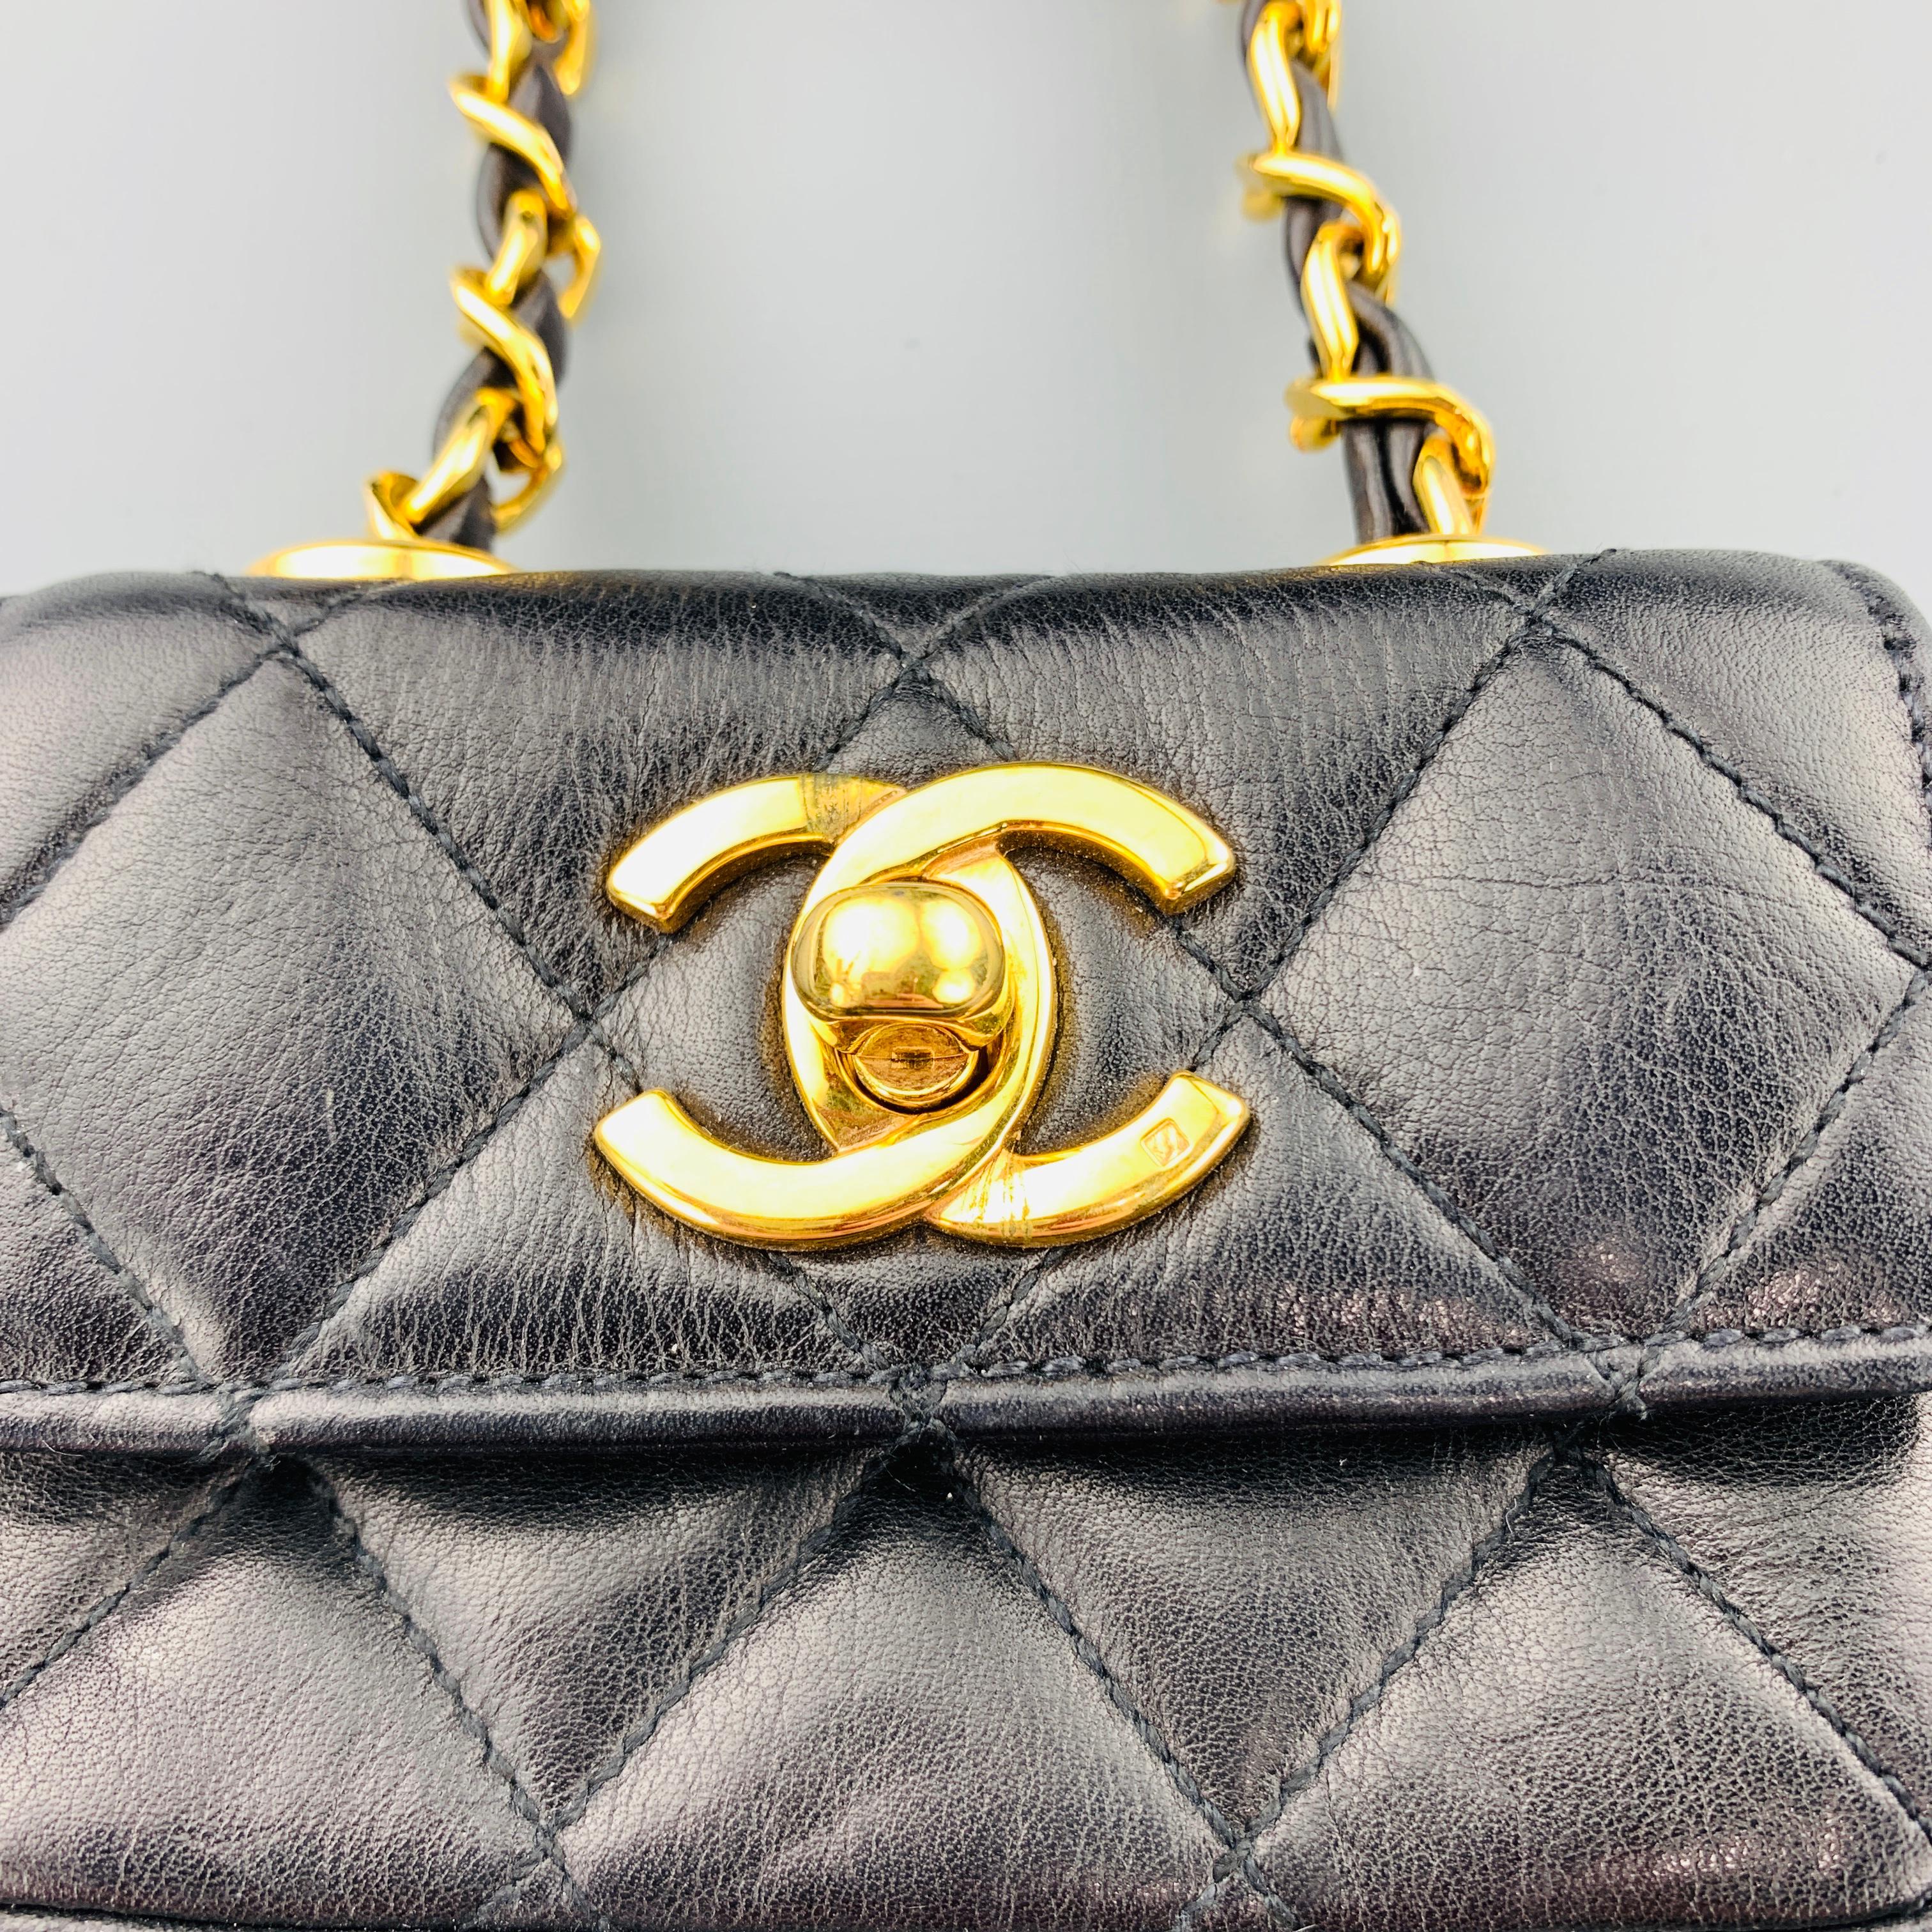 Vintage CHANEL mini purse coin pouch comes in black quilted leather with a flap top, yellow gold tone CC logo turn lock closure, and leather woven chain with Belt loop. Minor wear. Made in Italy.
 
Very Good Pre-Owned Condition.
Marked: 2300502
